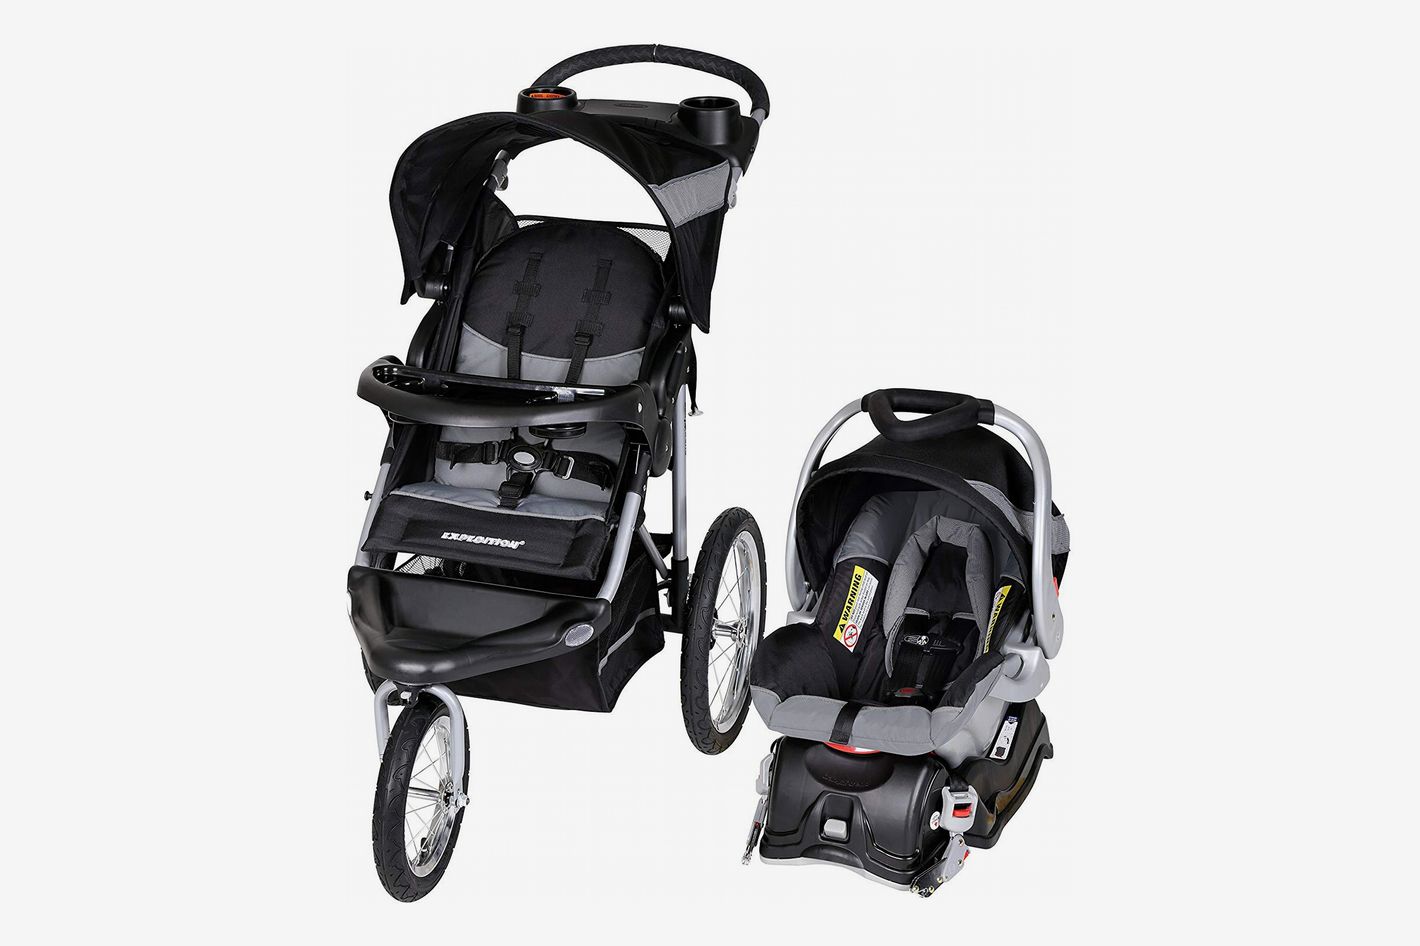 9 Best Car Seat Strollers 2019 The Strategist - Best Safety Rated Infant Car Seat Stroller Combo